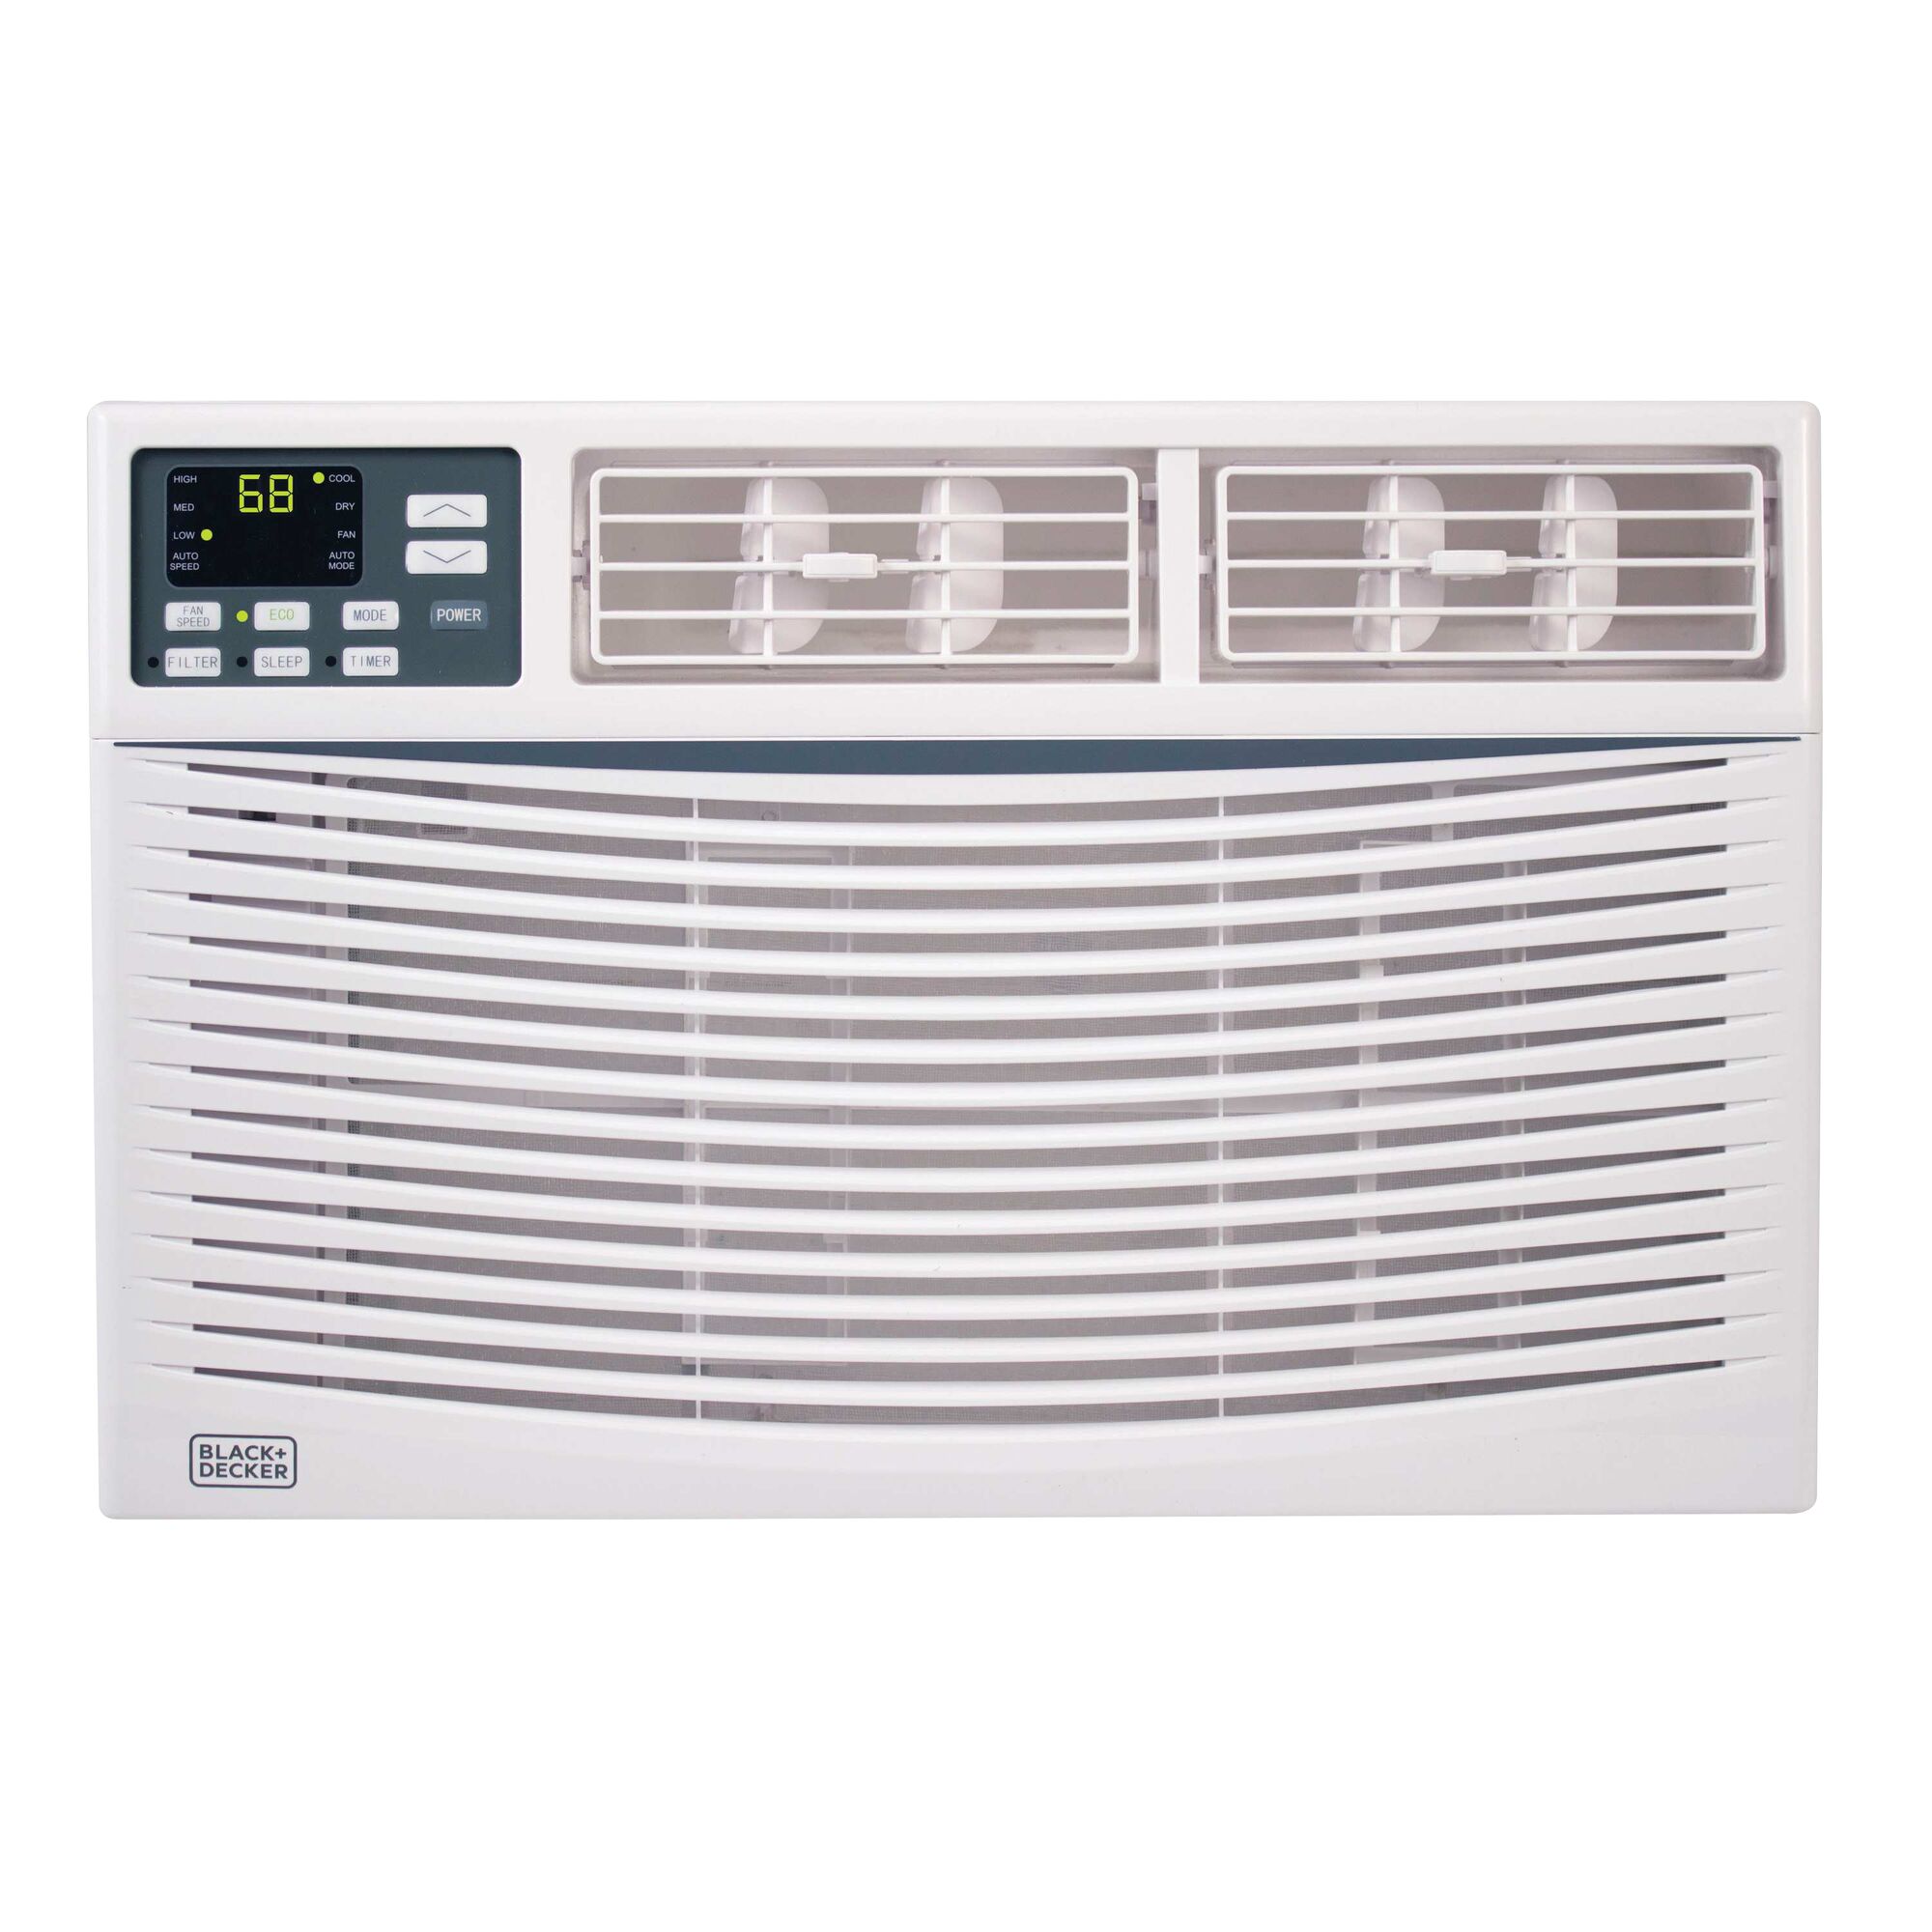 8000 B T U Energy Star Electric Air Conditioner with Remote.